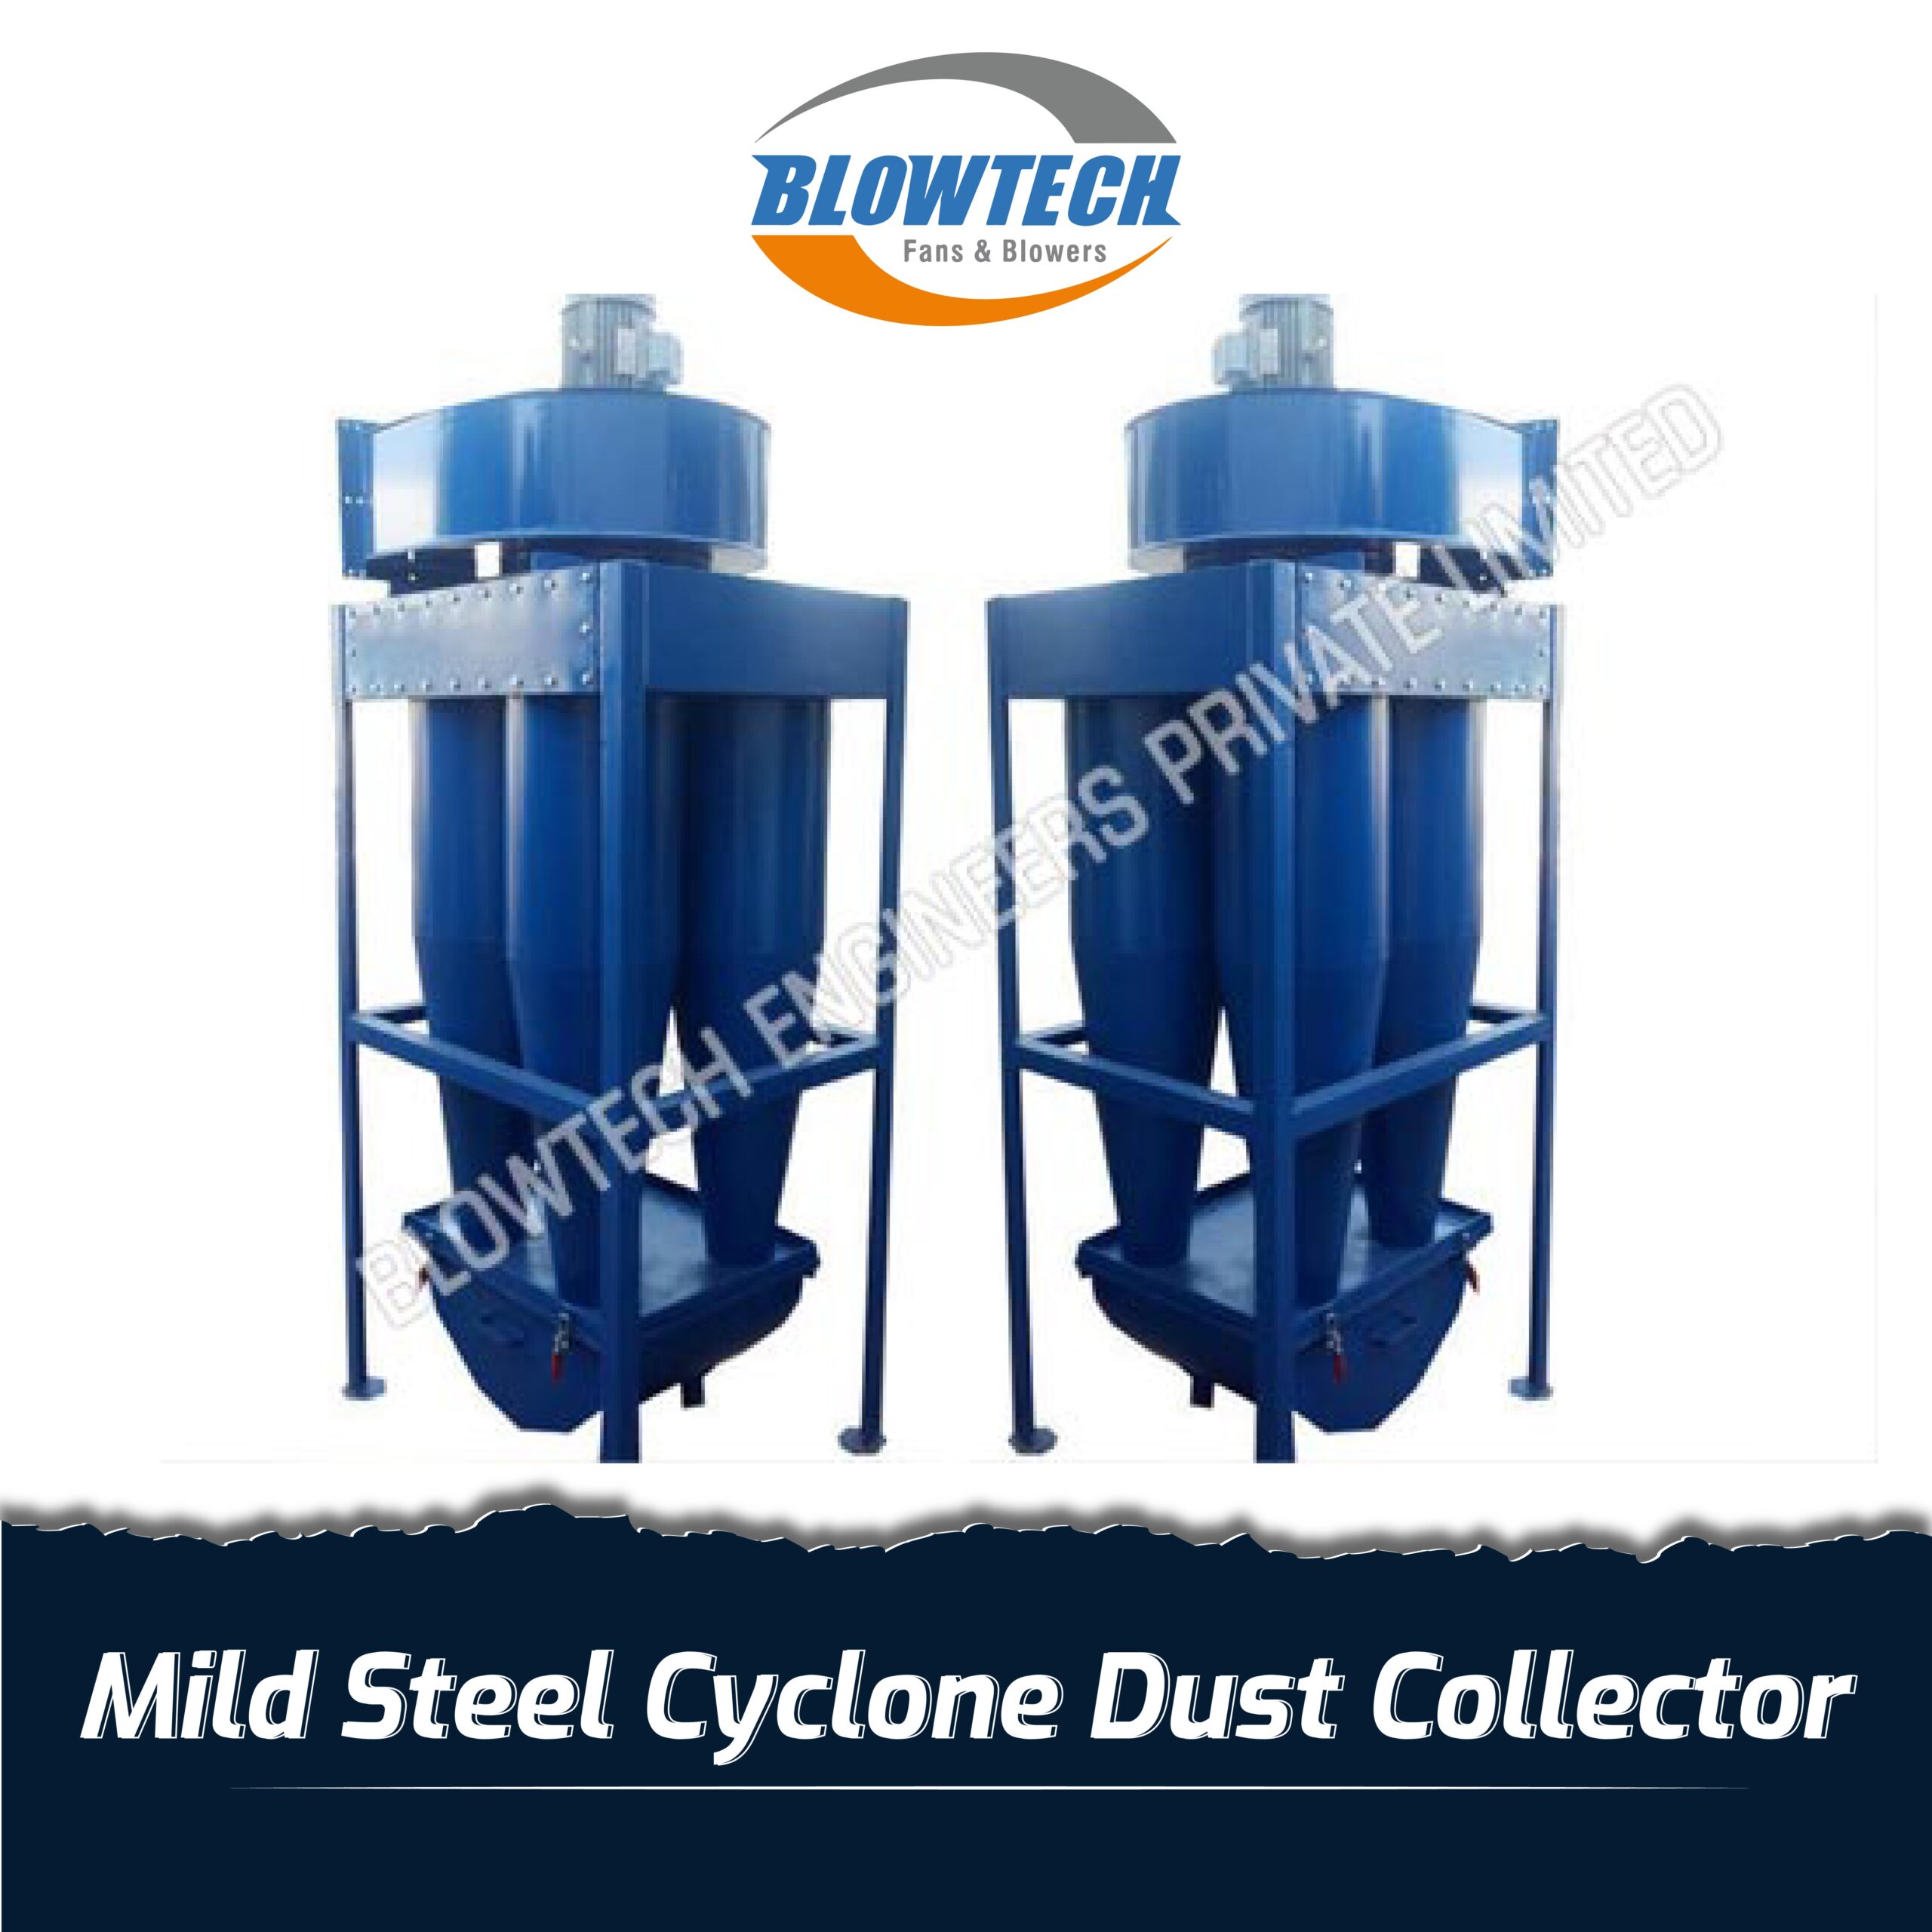 Mild Steel Cyclone Dust Collector  manufacturer, supplier and exporter in Mumbai, India